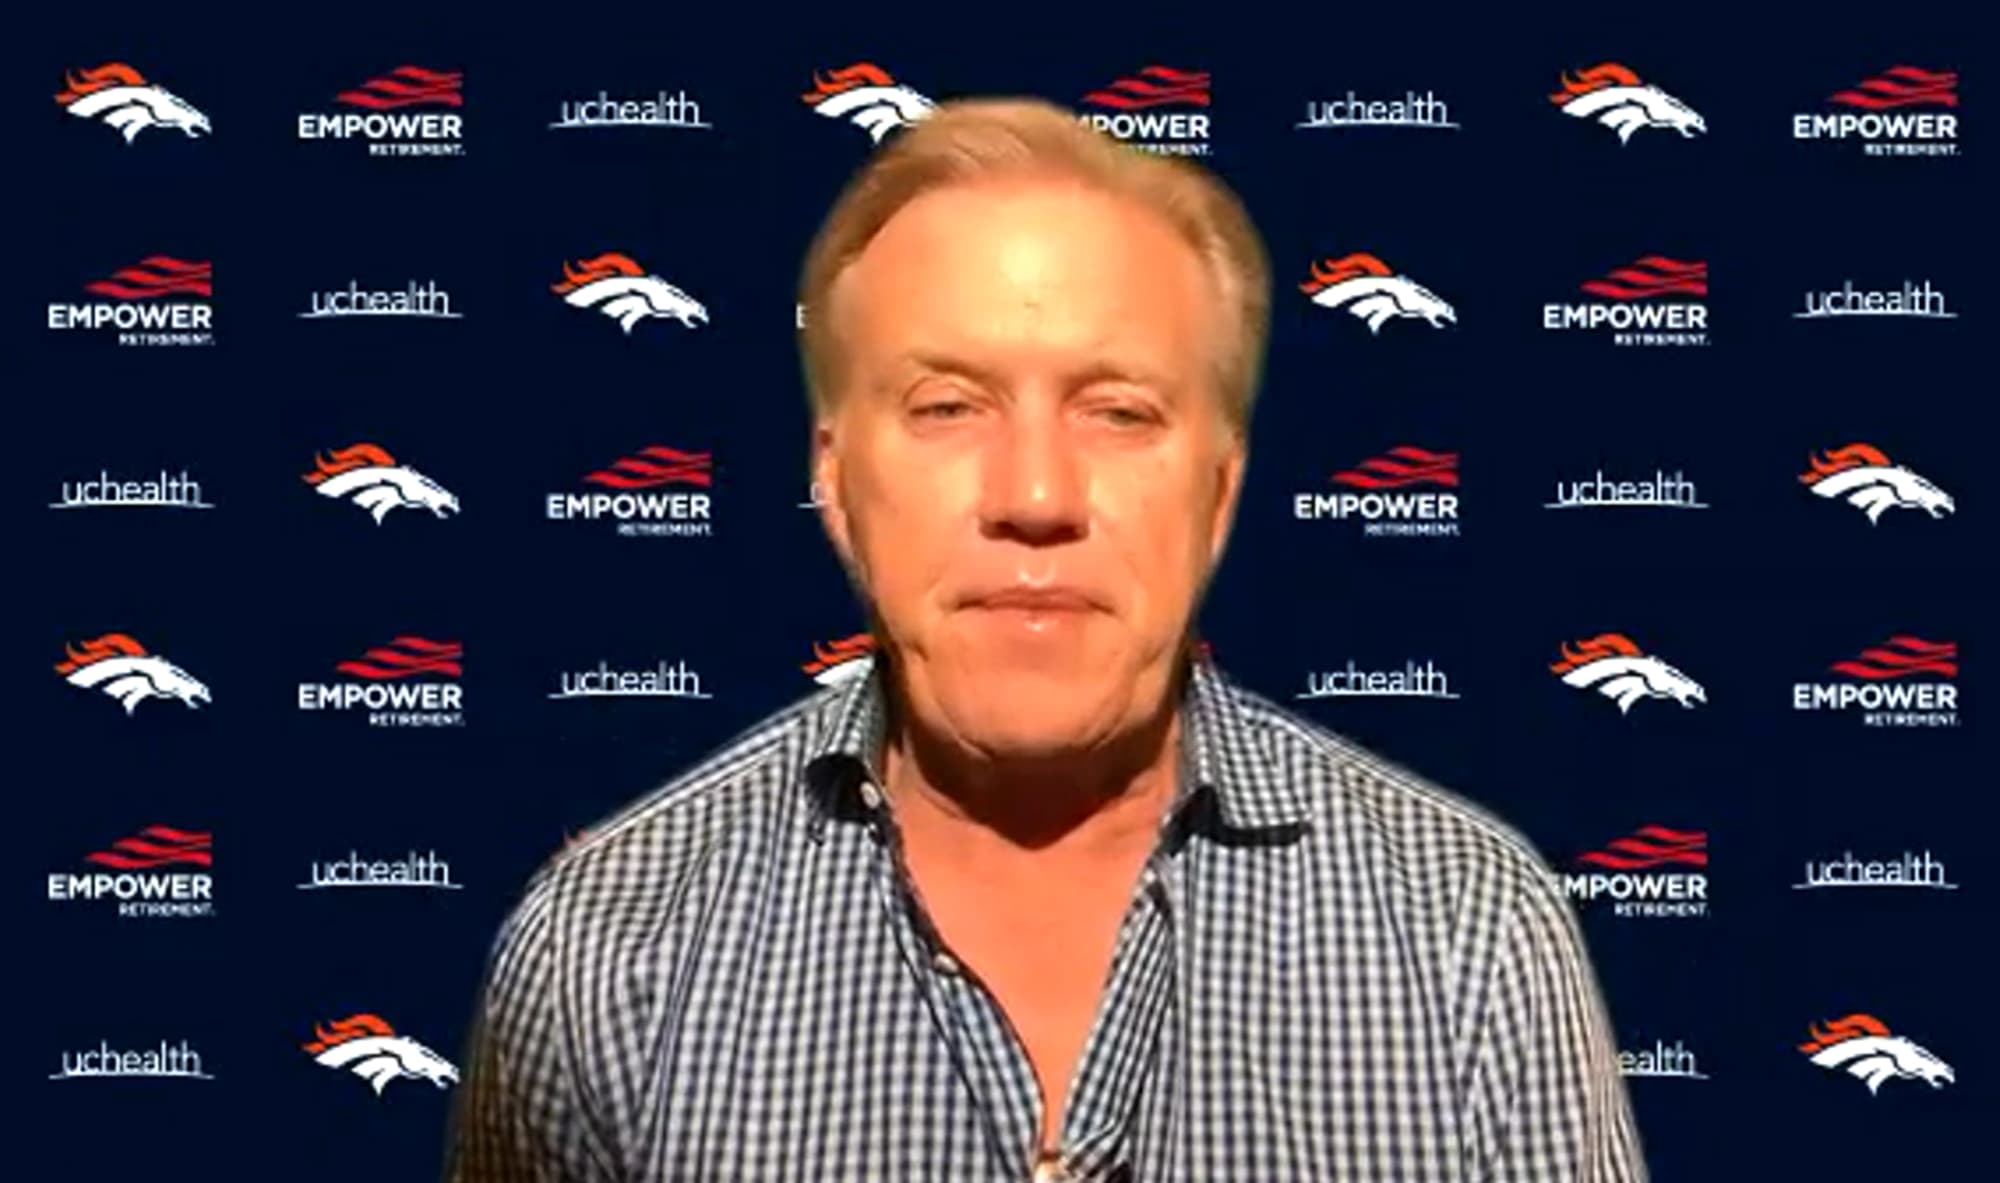 Espns John Elway Graphic Is Going Viral For The Wrong Reasons